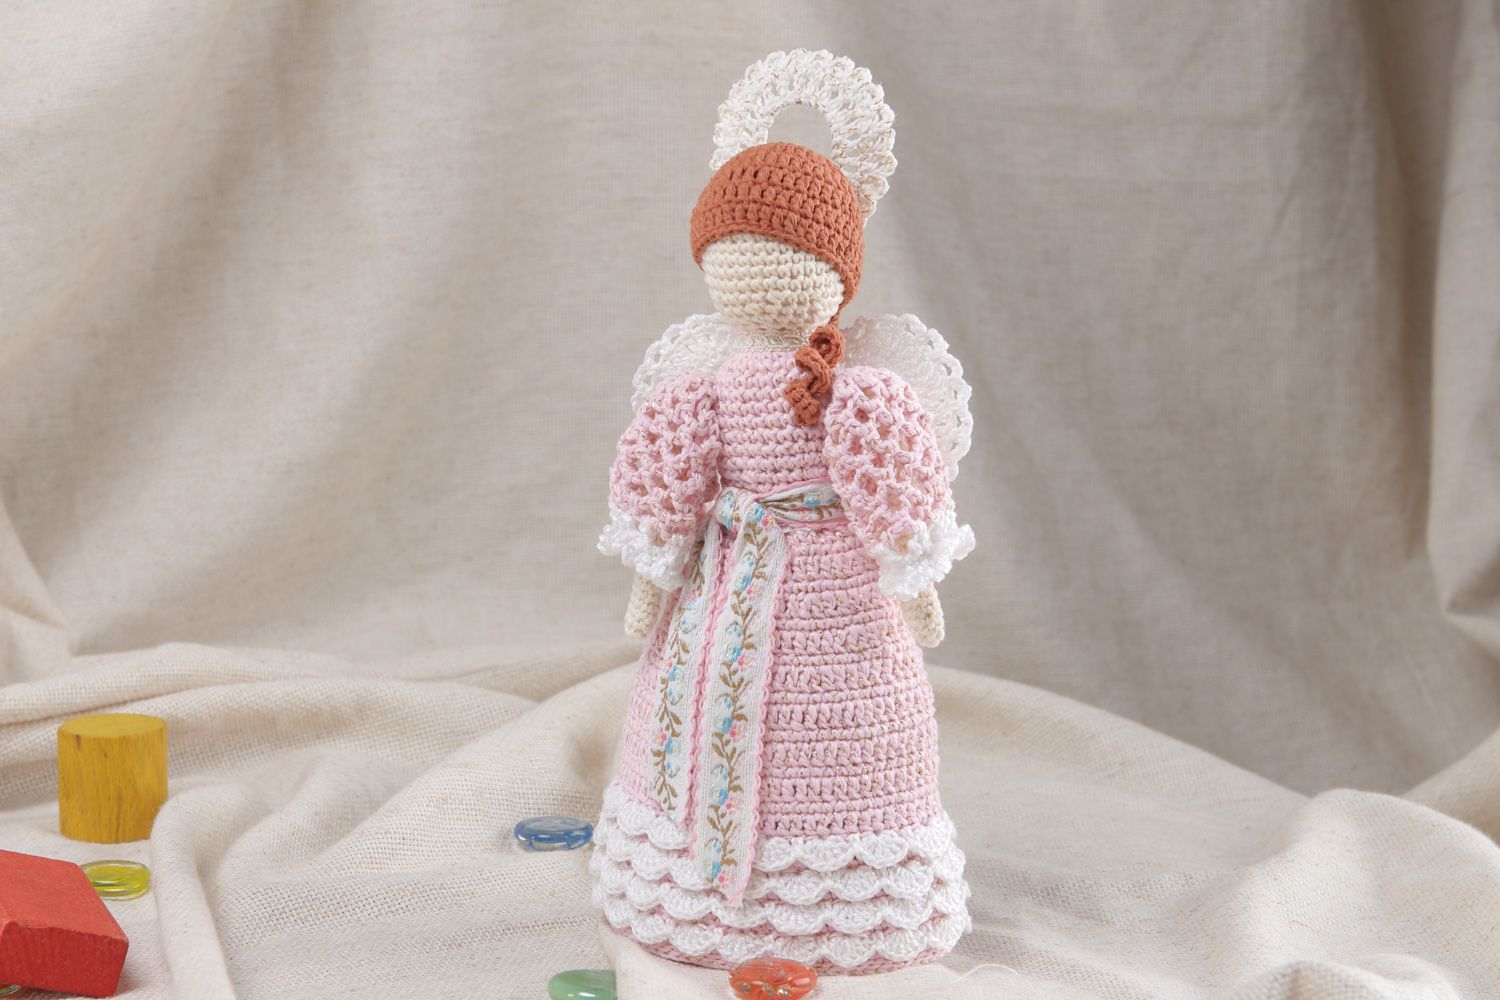 Handmade soft toy angel crocheted of cotton threads for kids and interior decor photo 5